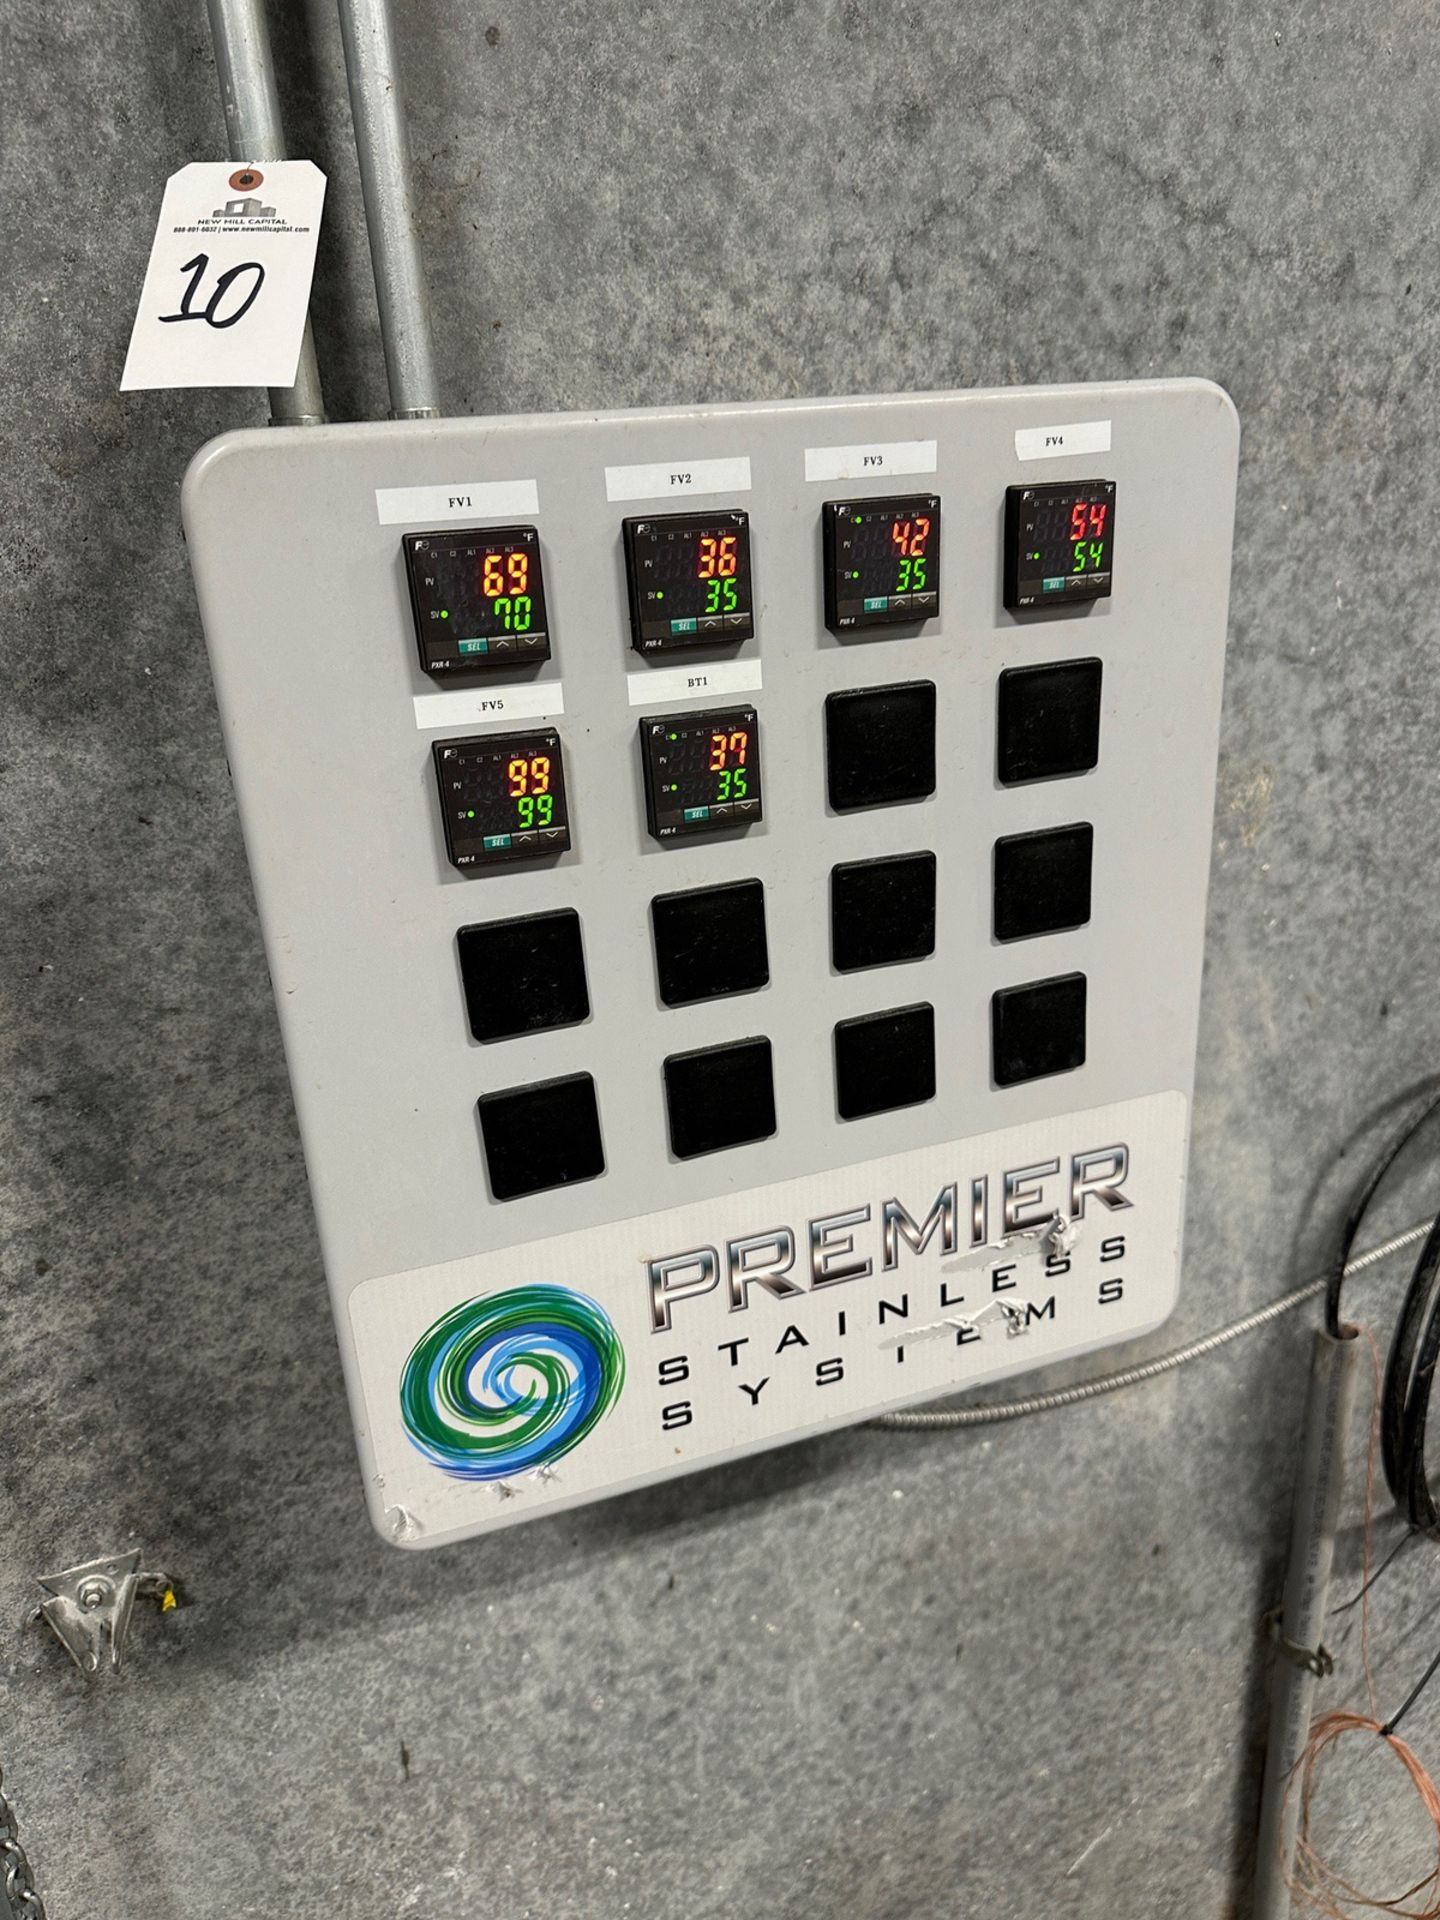 Premier Stainless Cellar Control Panel - Model CPFV-16, S/N 1703-6/16 | Rig Fee $150